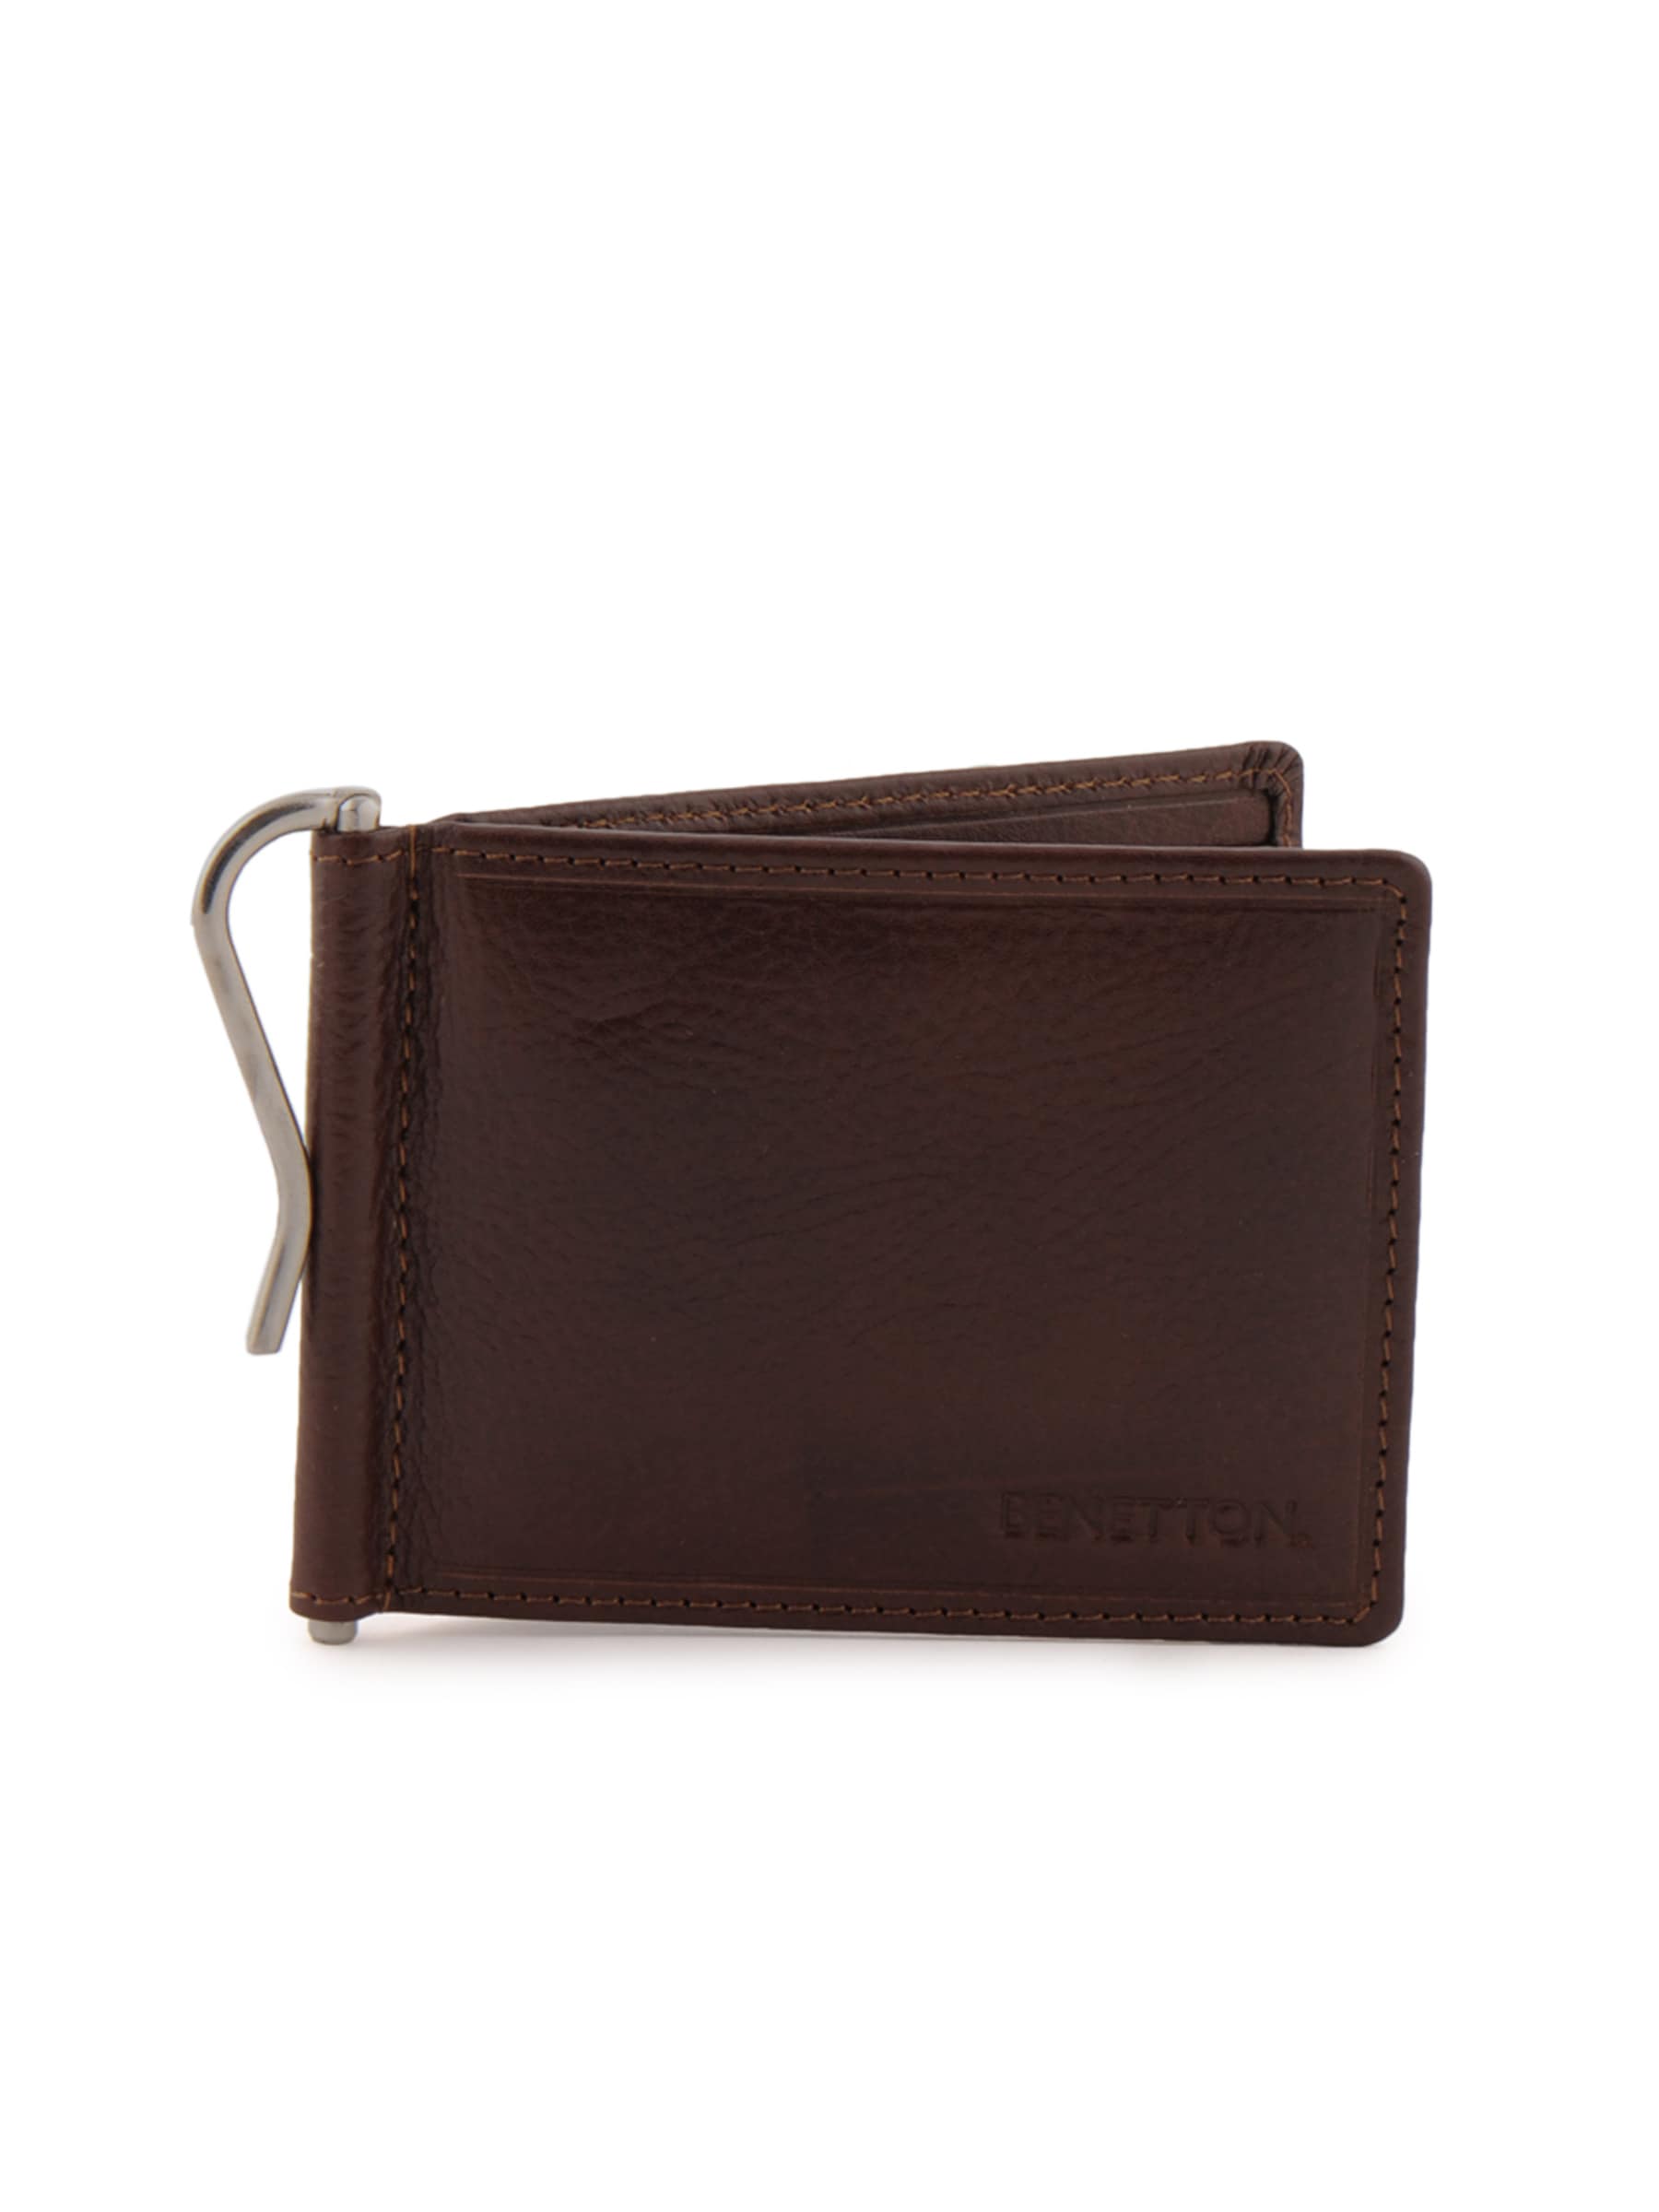 United Colors of Benetton Men Solid Brown Wallets